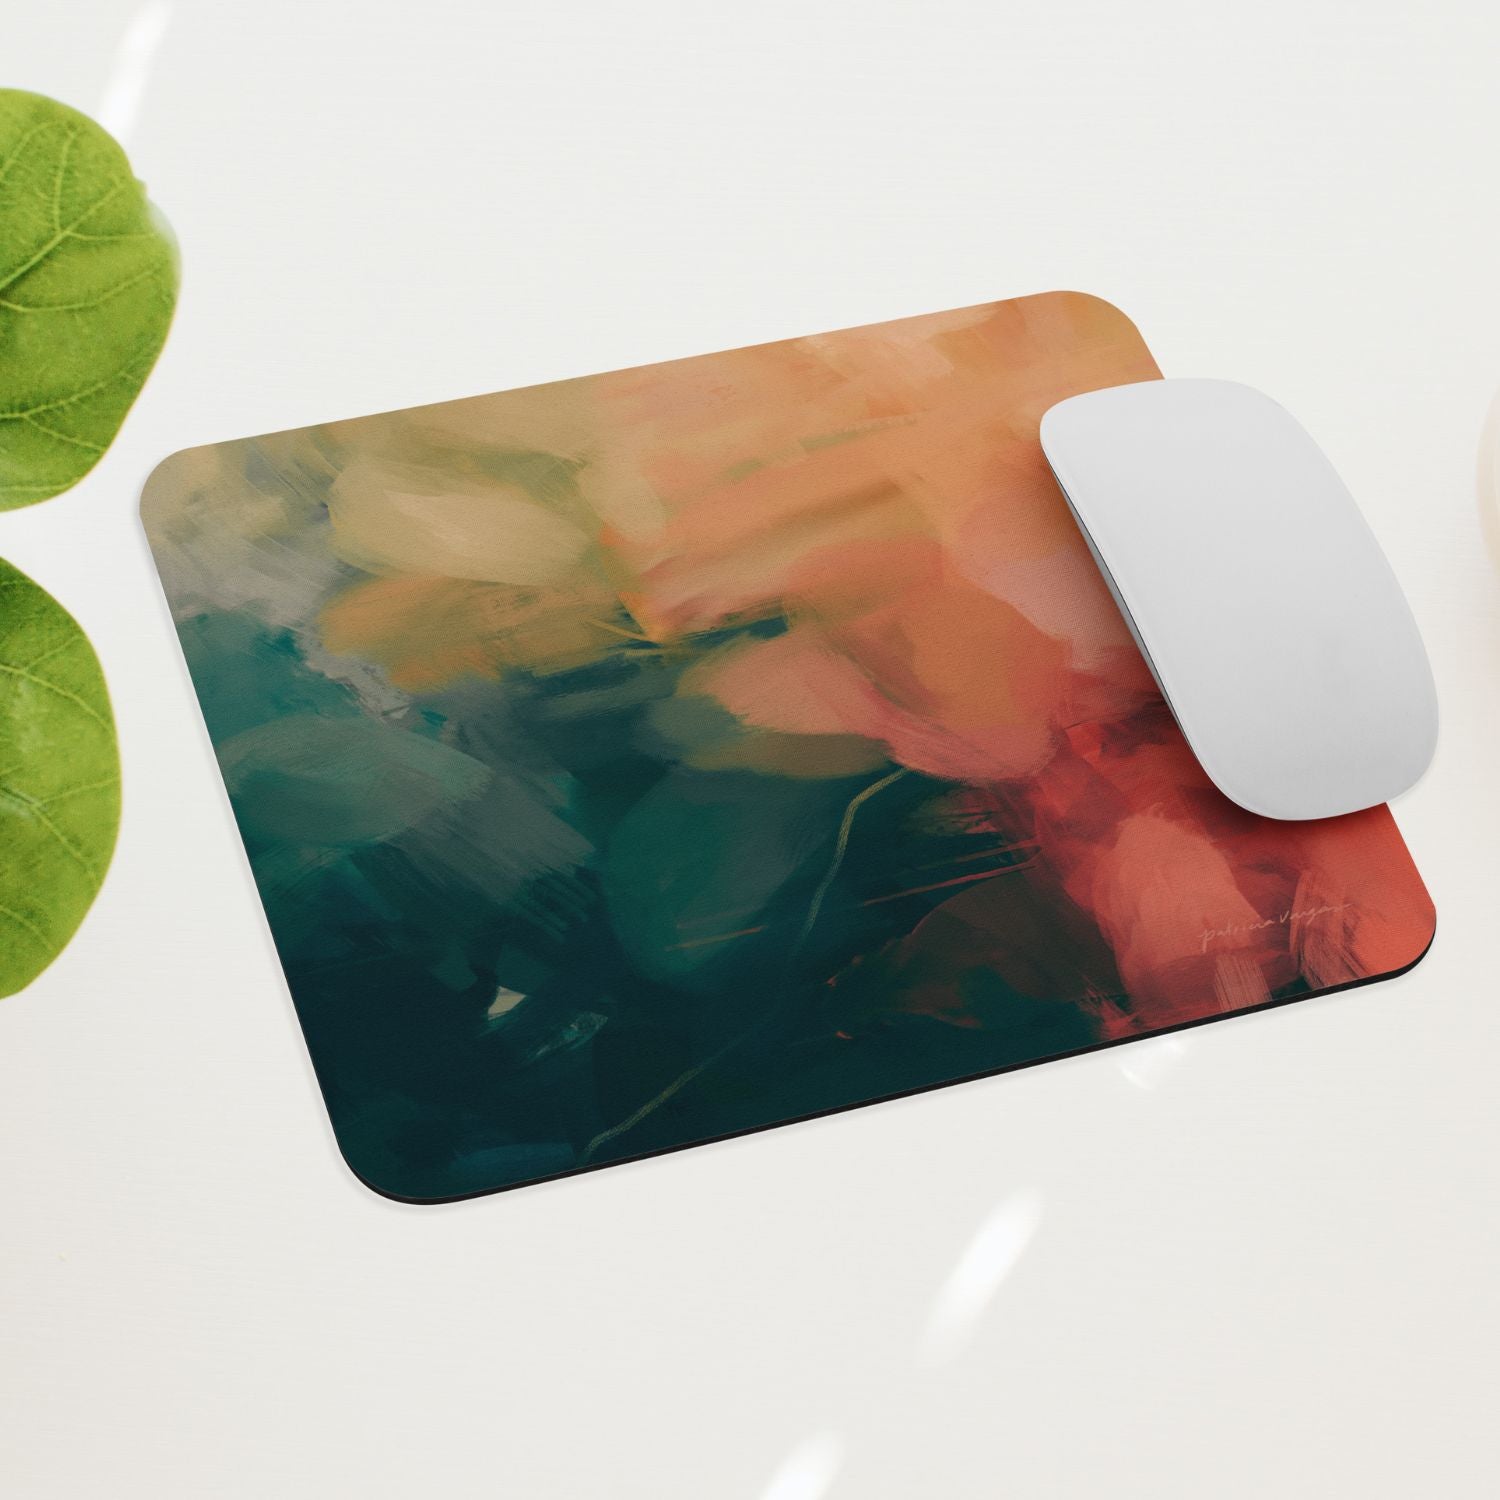 Eventide, green and red mouse pad for styling your office desk. Featuring artwork by Parima Studio. Home office styling accessories, cubicle styling accessories.